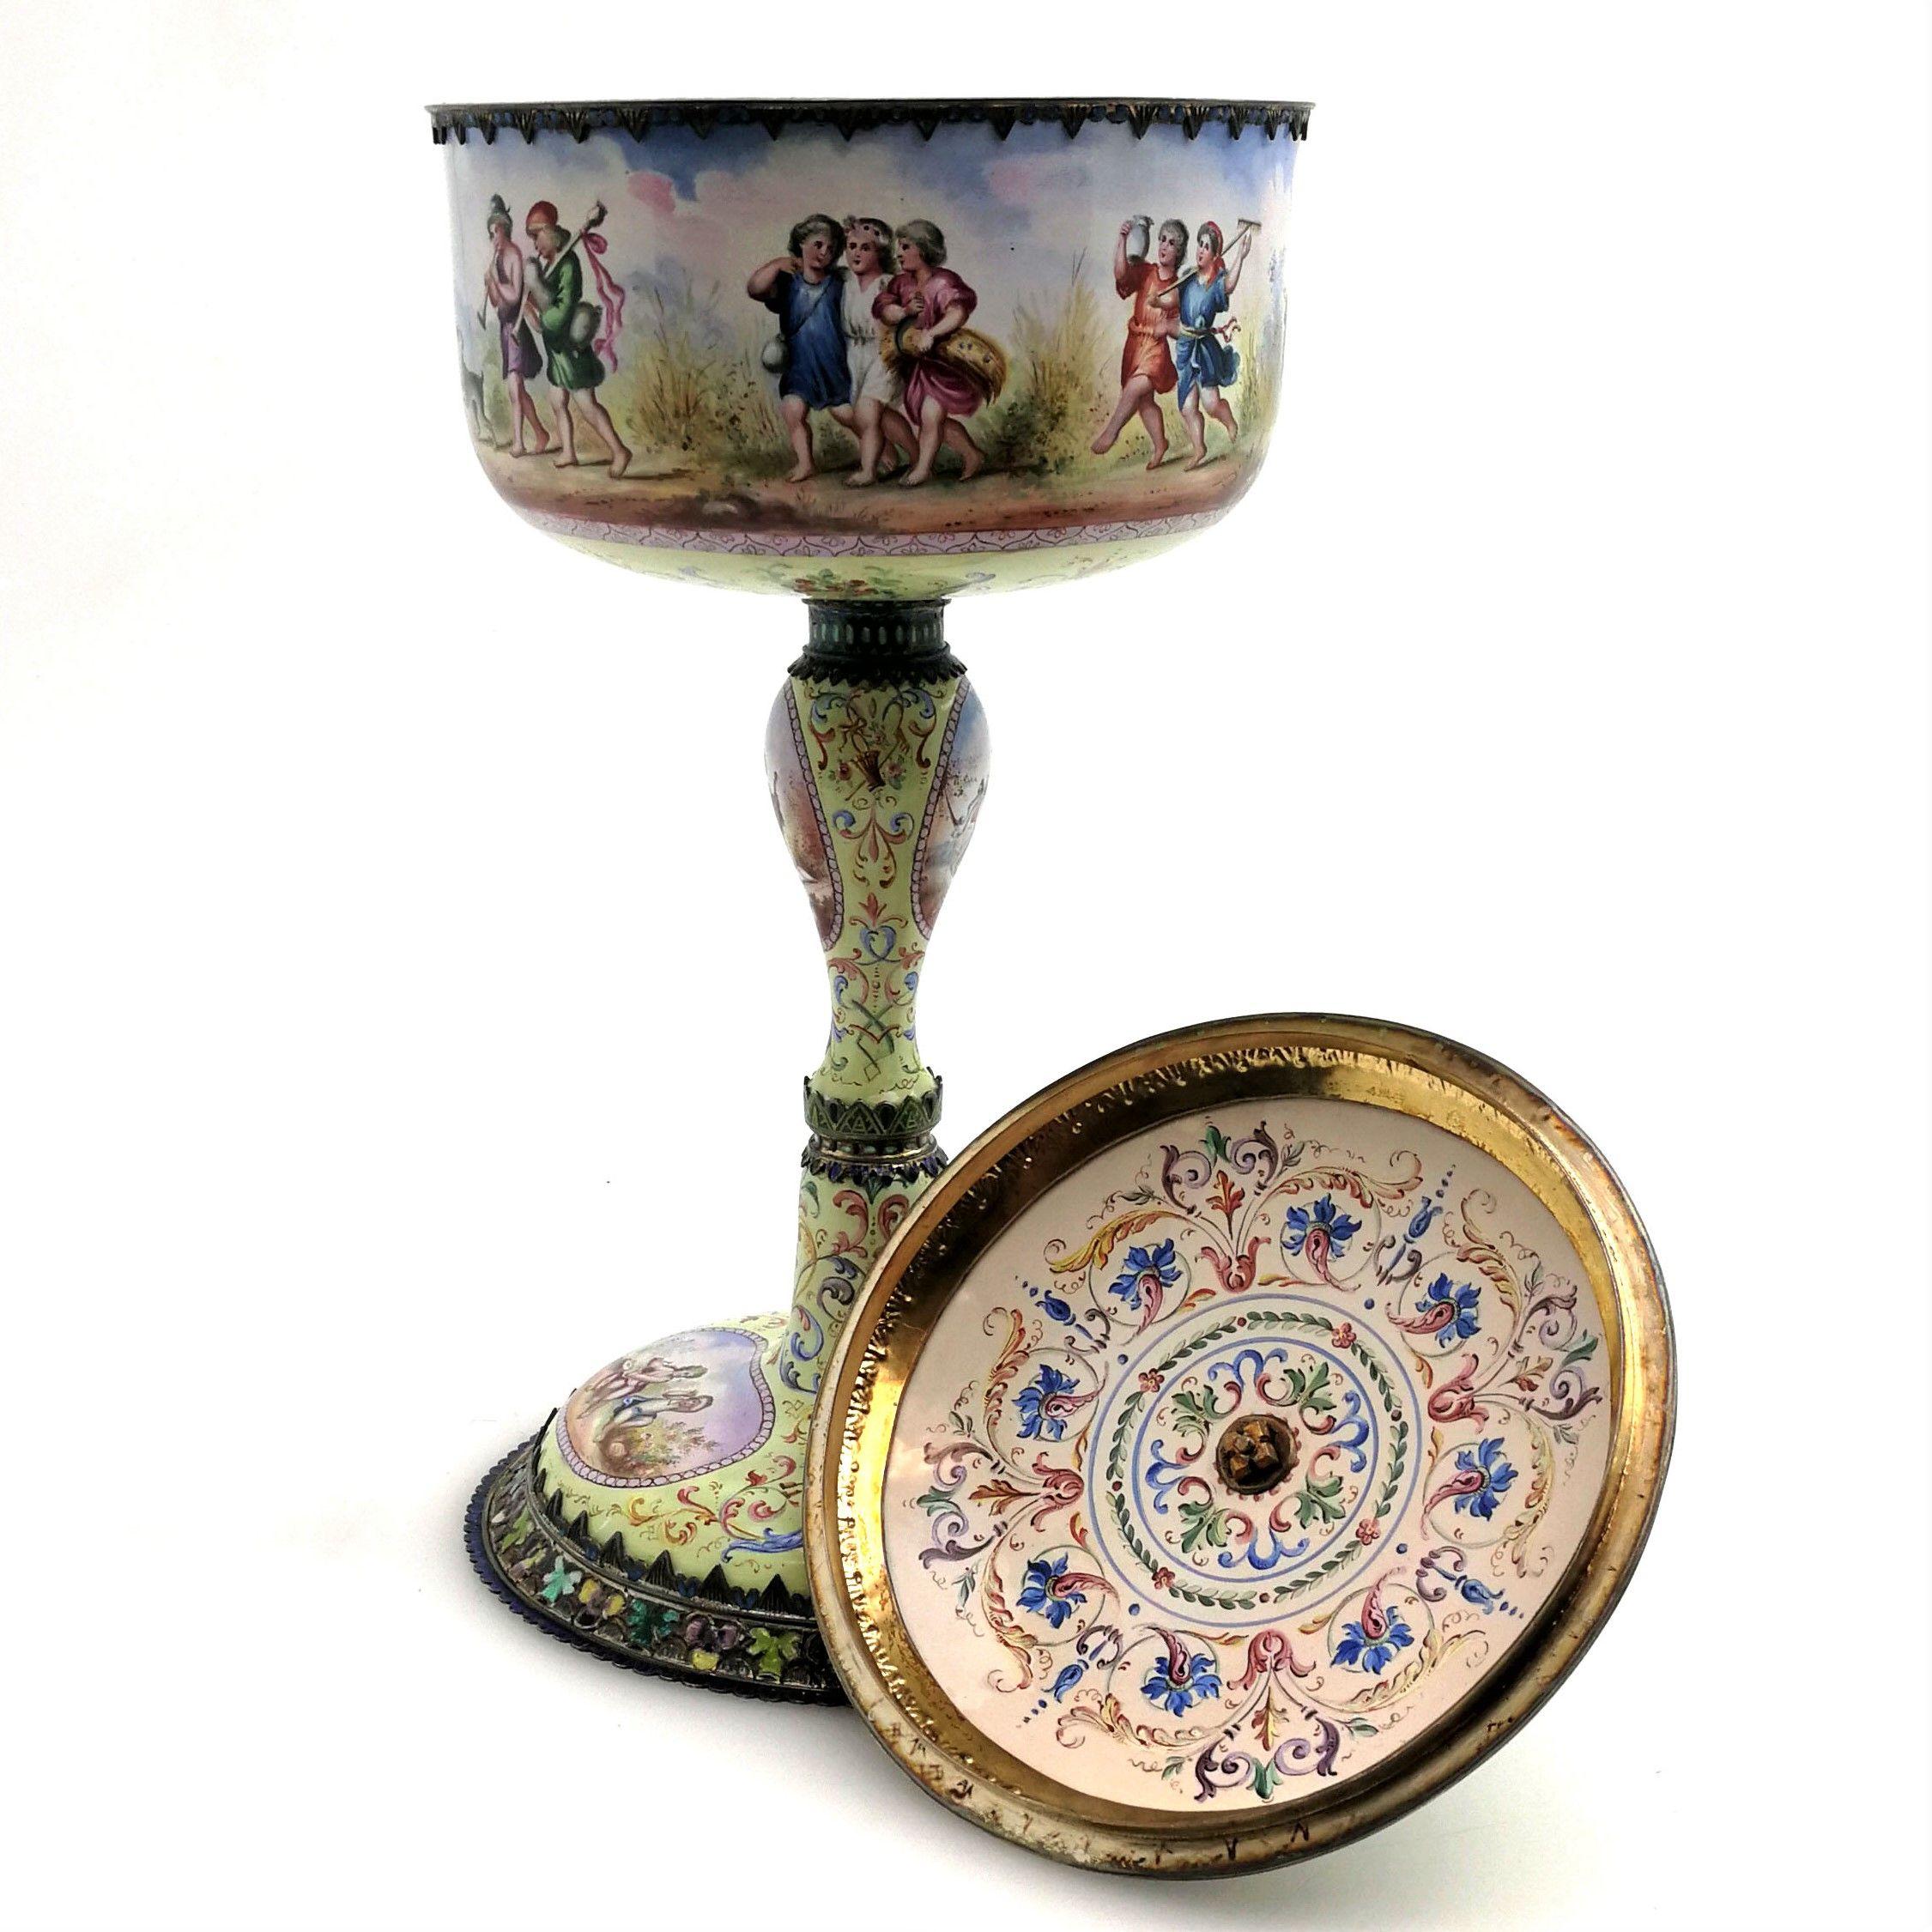 A magnificent Antique Silver and Viennese Enamel standing Cup and Cover. This impressive Cup has a straight sided body supported by a shaped column on a wide spread foot. The Cup has a fitted lid with a figural finial. The entire exterior and